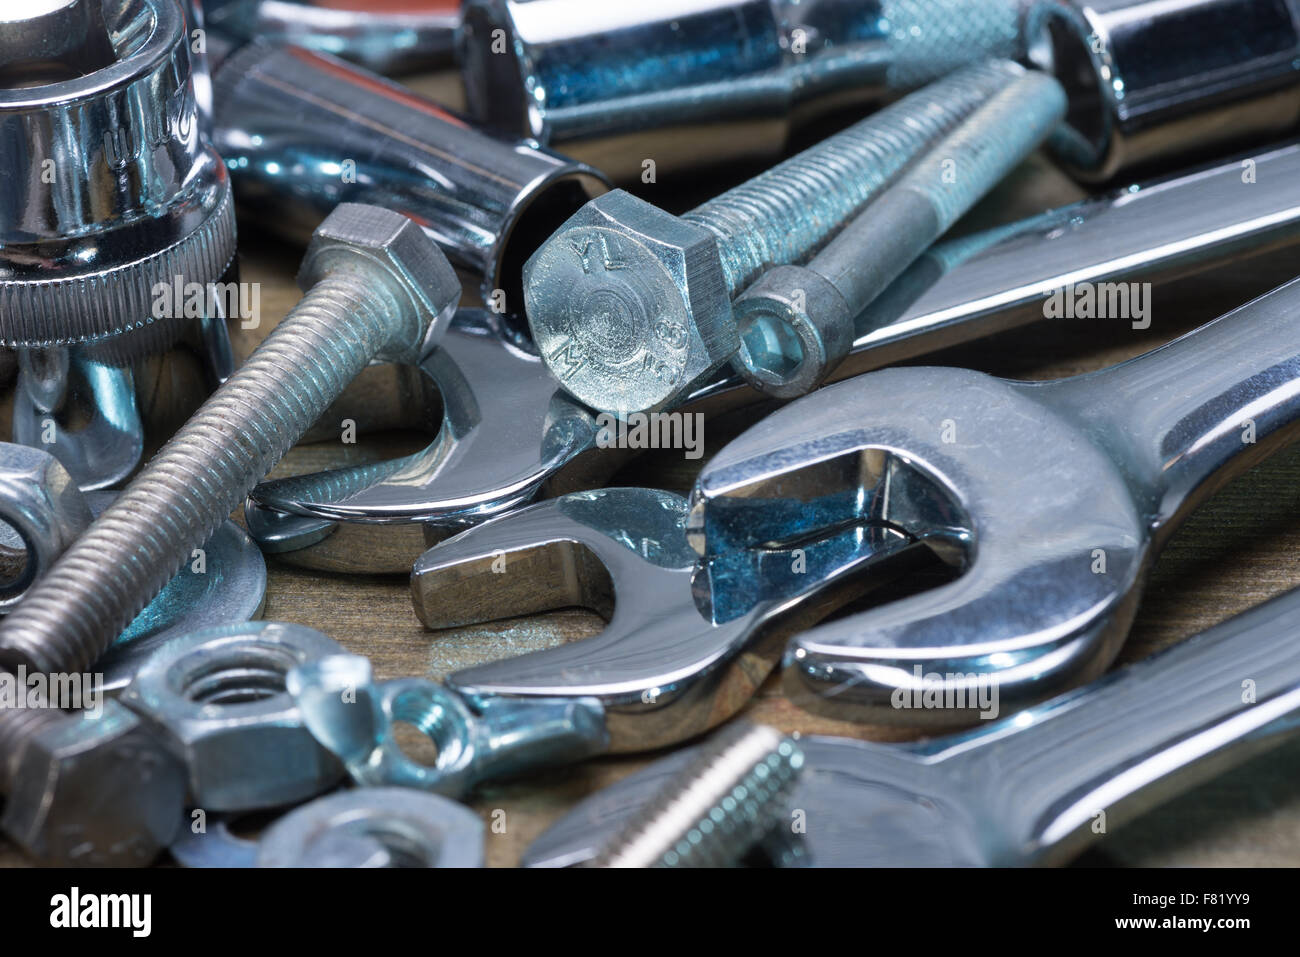 wrenches and other bench tools for mechanic Stock Photo